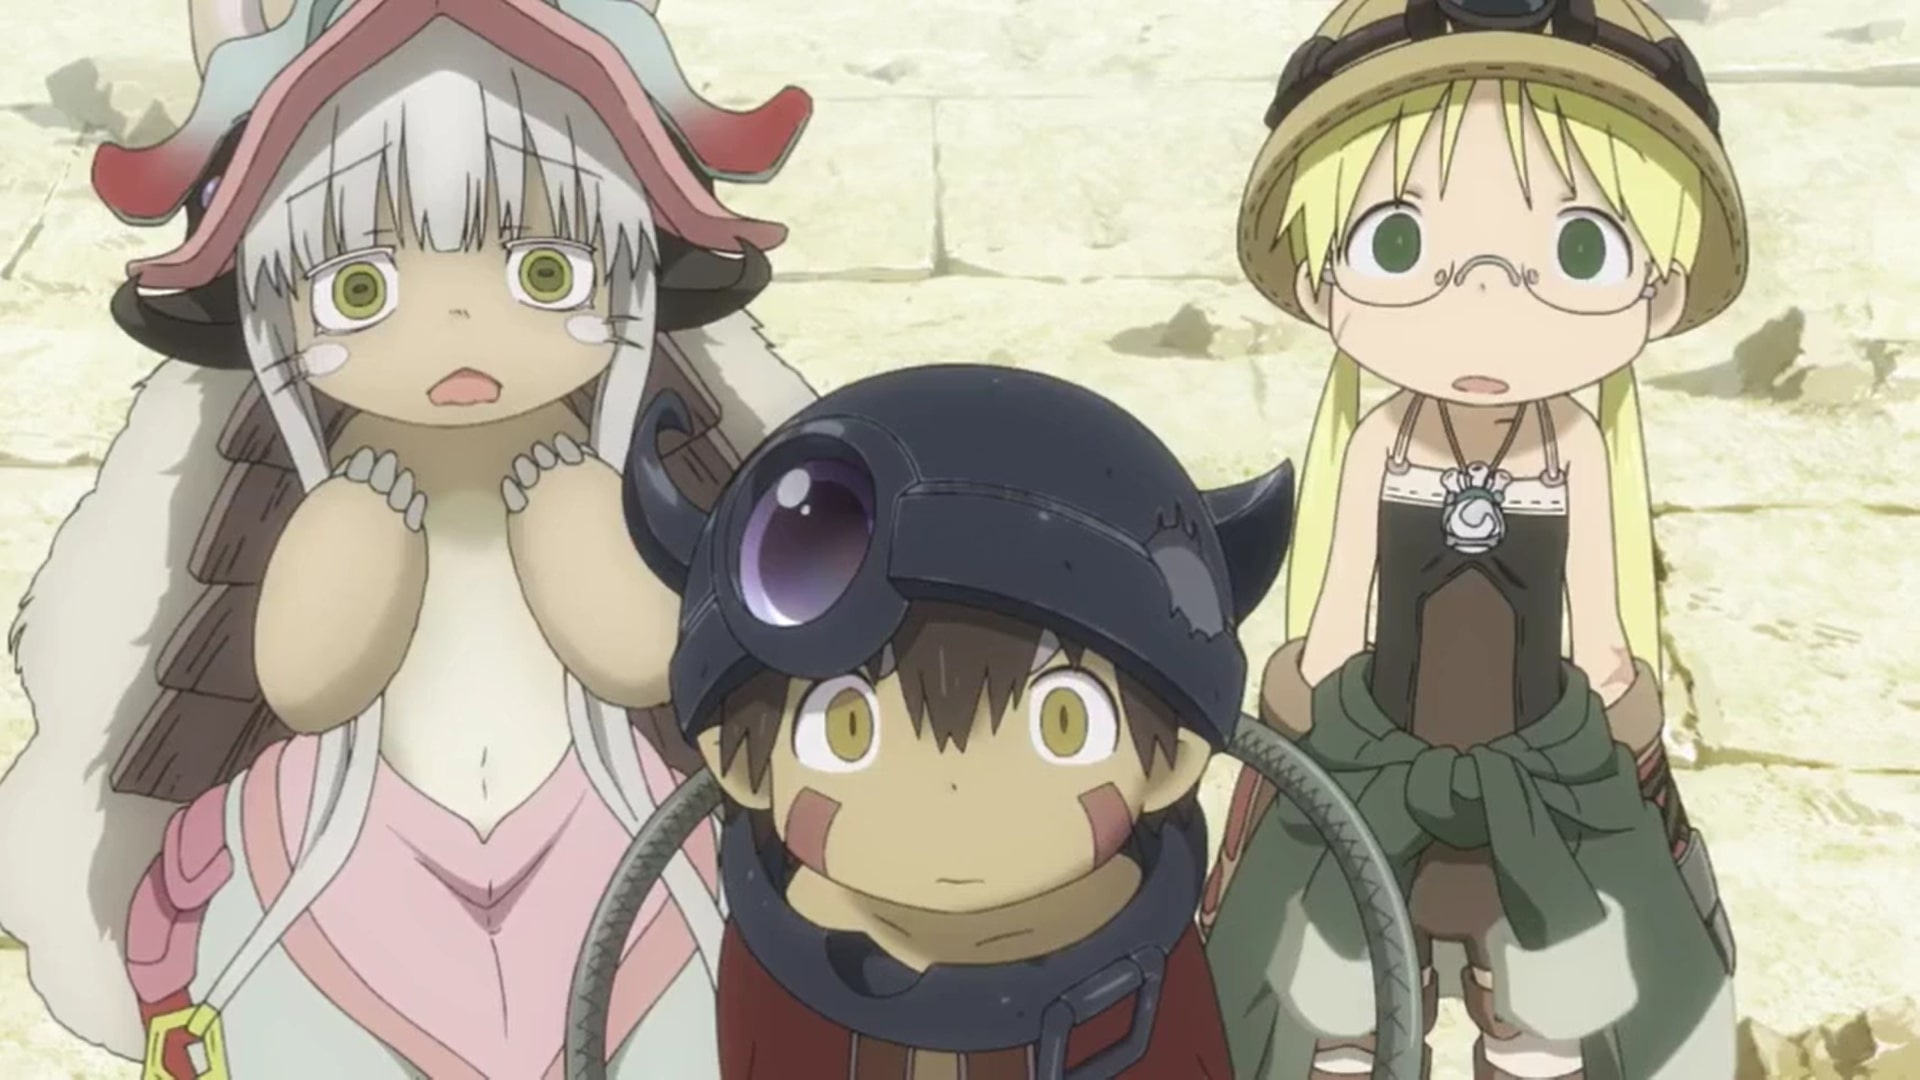 Made in Abyss Season 2 Episode 2 Recap: Capital of the Unreturned